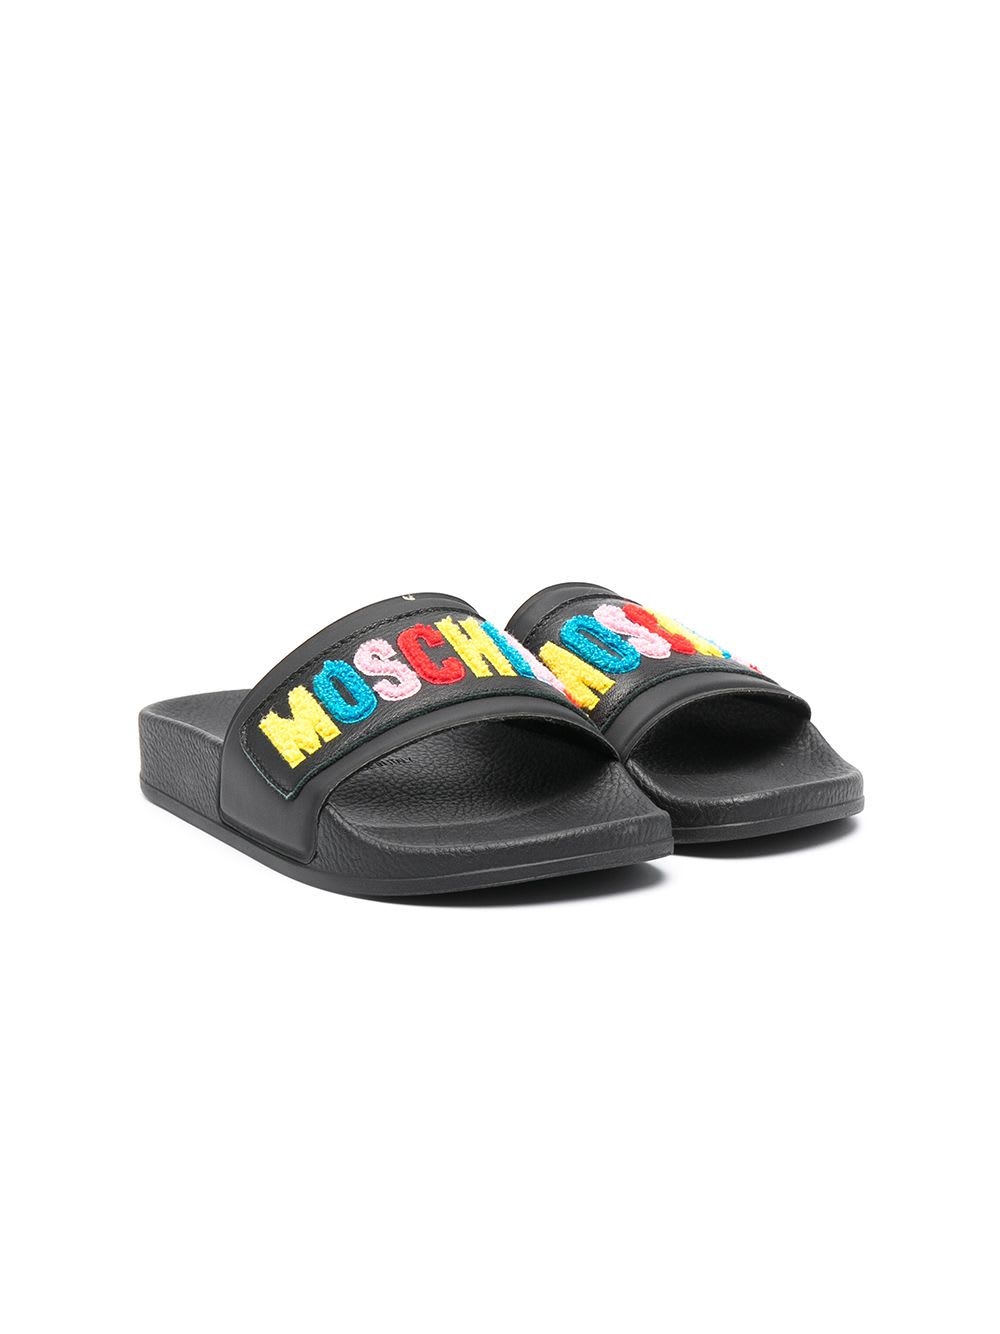 Moschino Slippers With Multicolor Writing